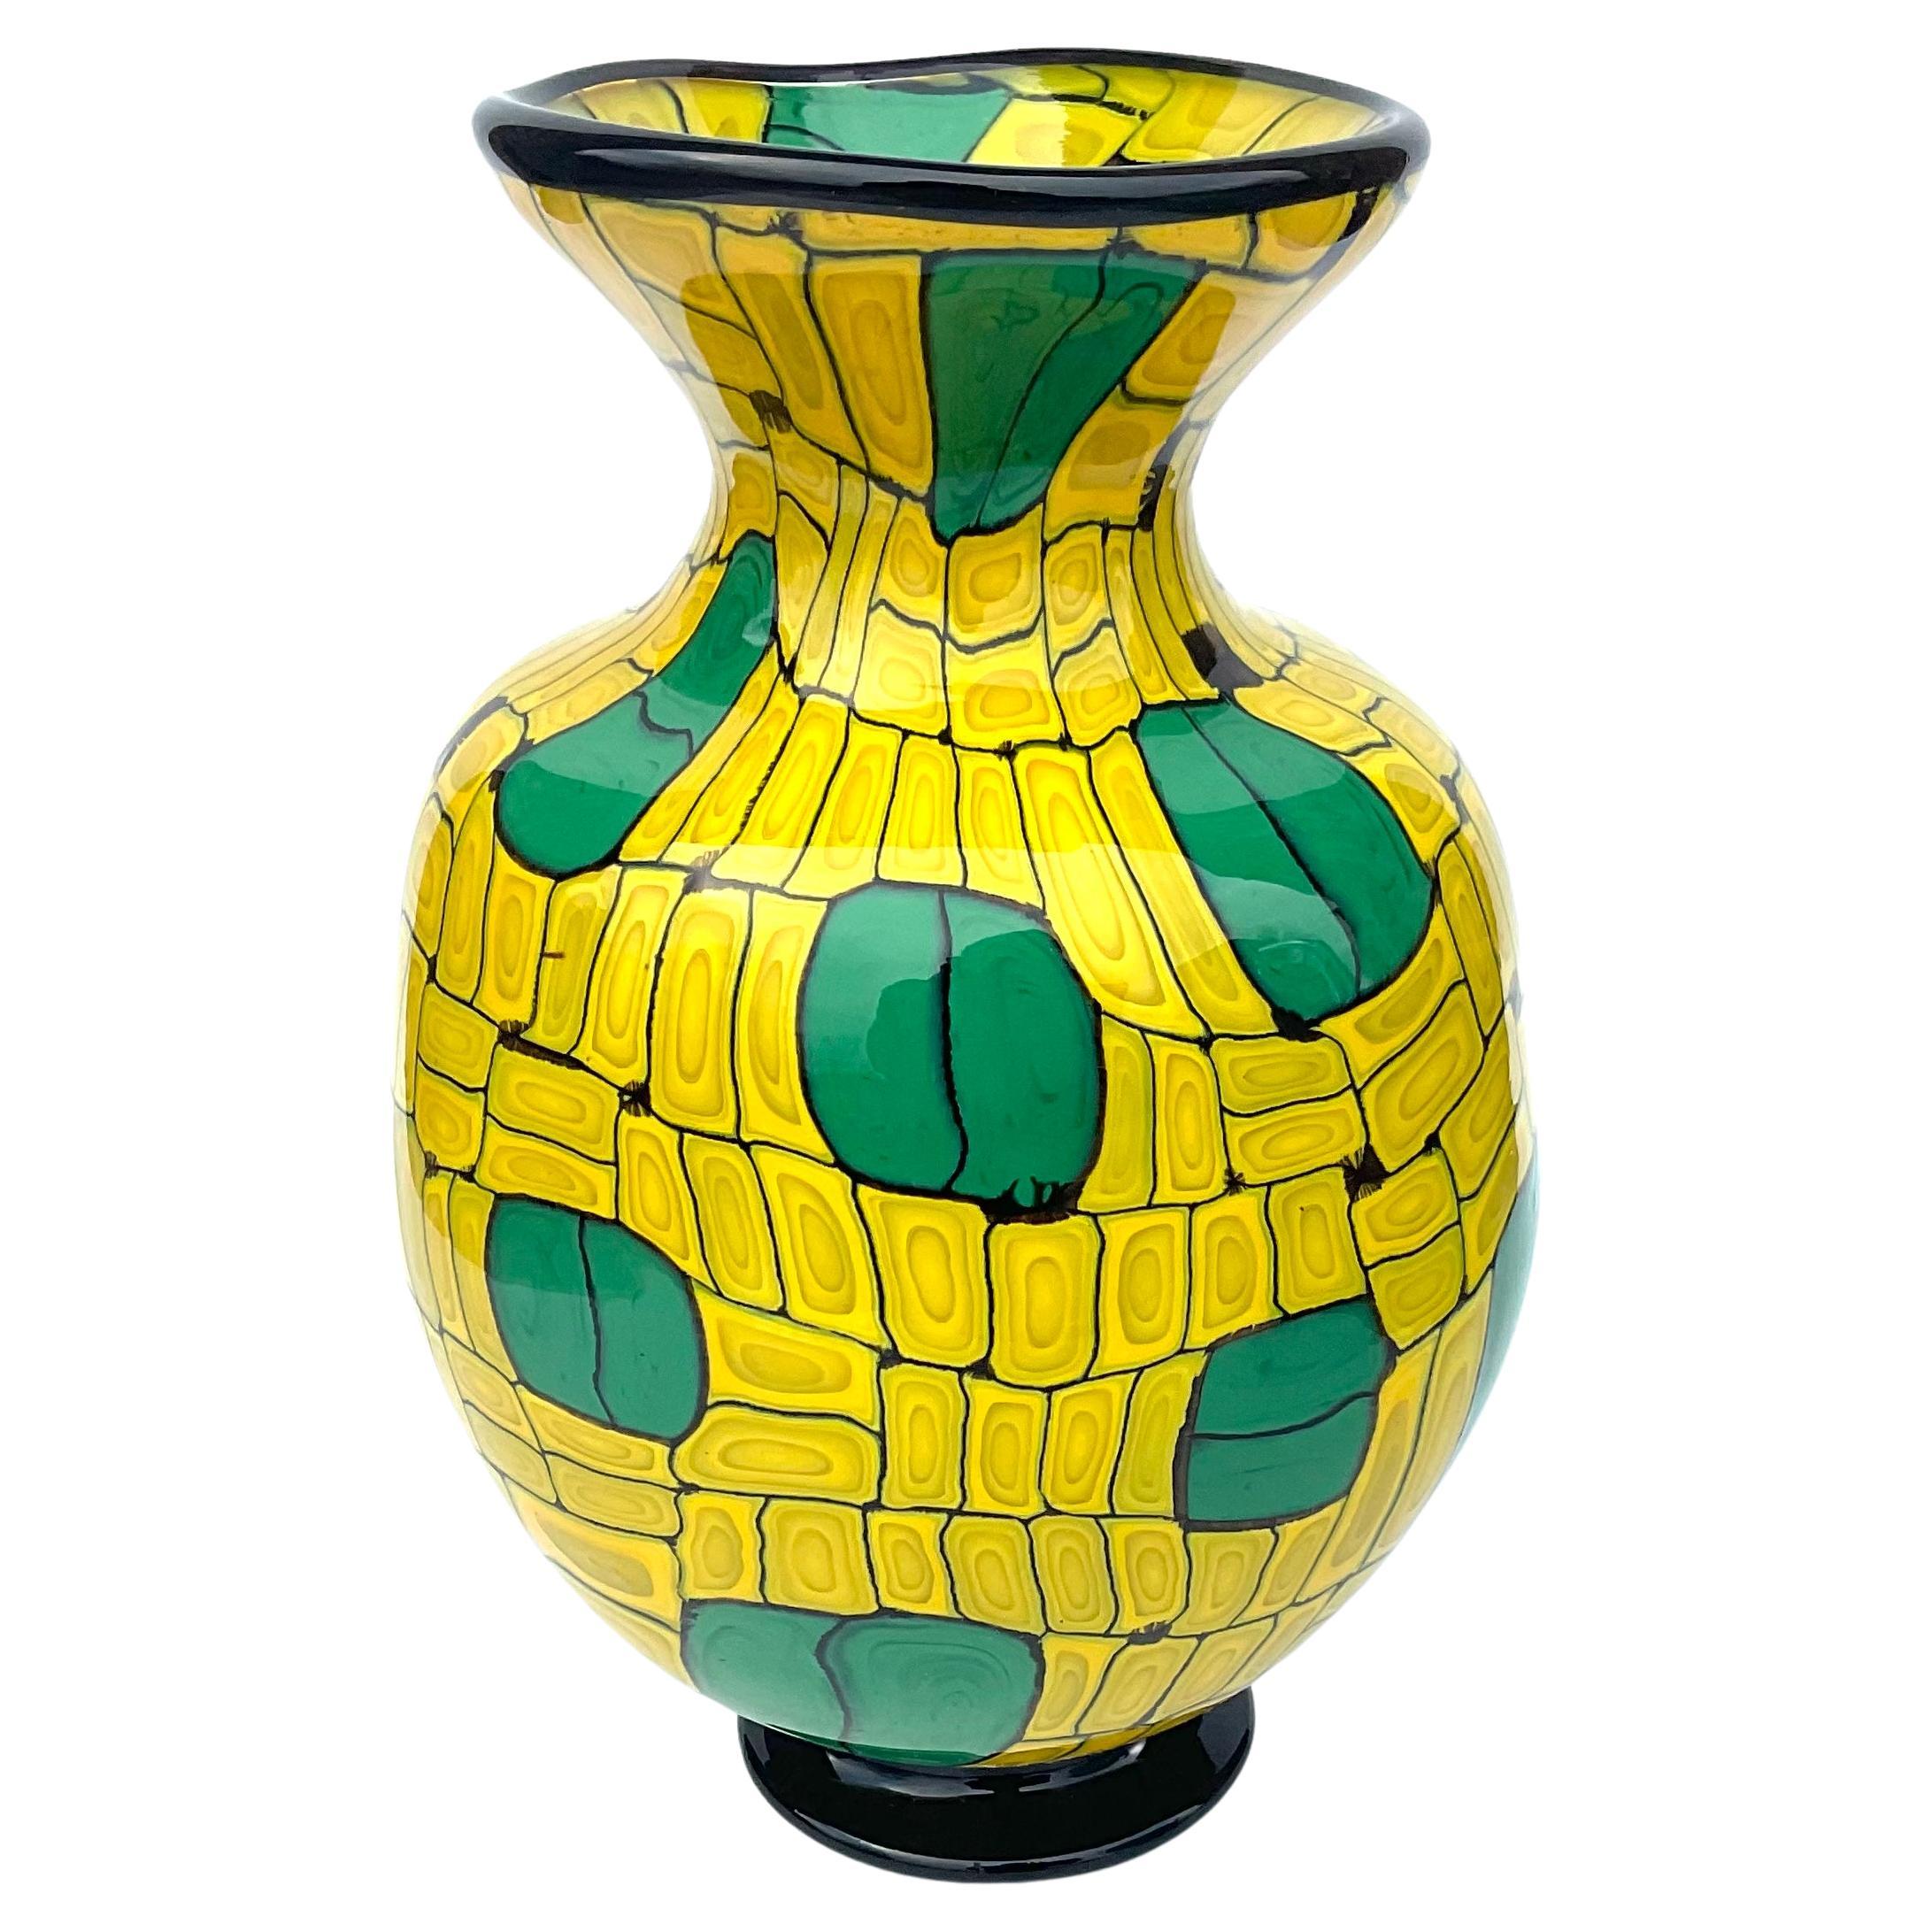 Ballerin Murano Art Glass Vase Yellow Murrine Decorated Signed by the Artist For Sale